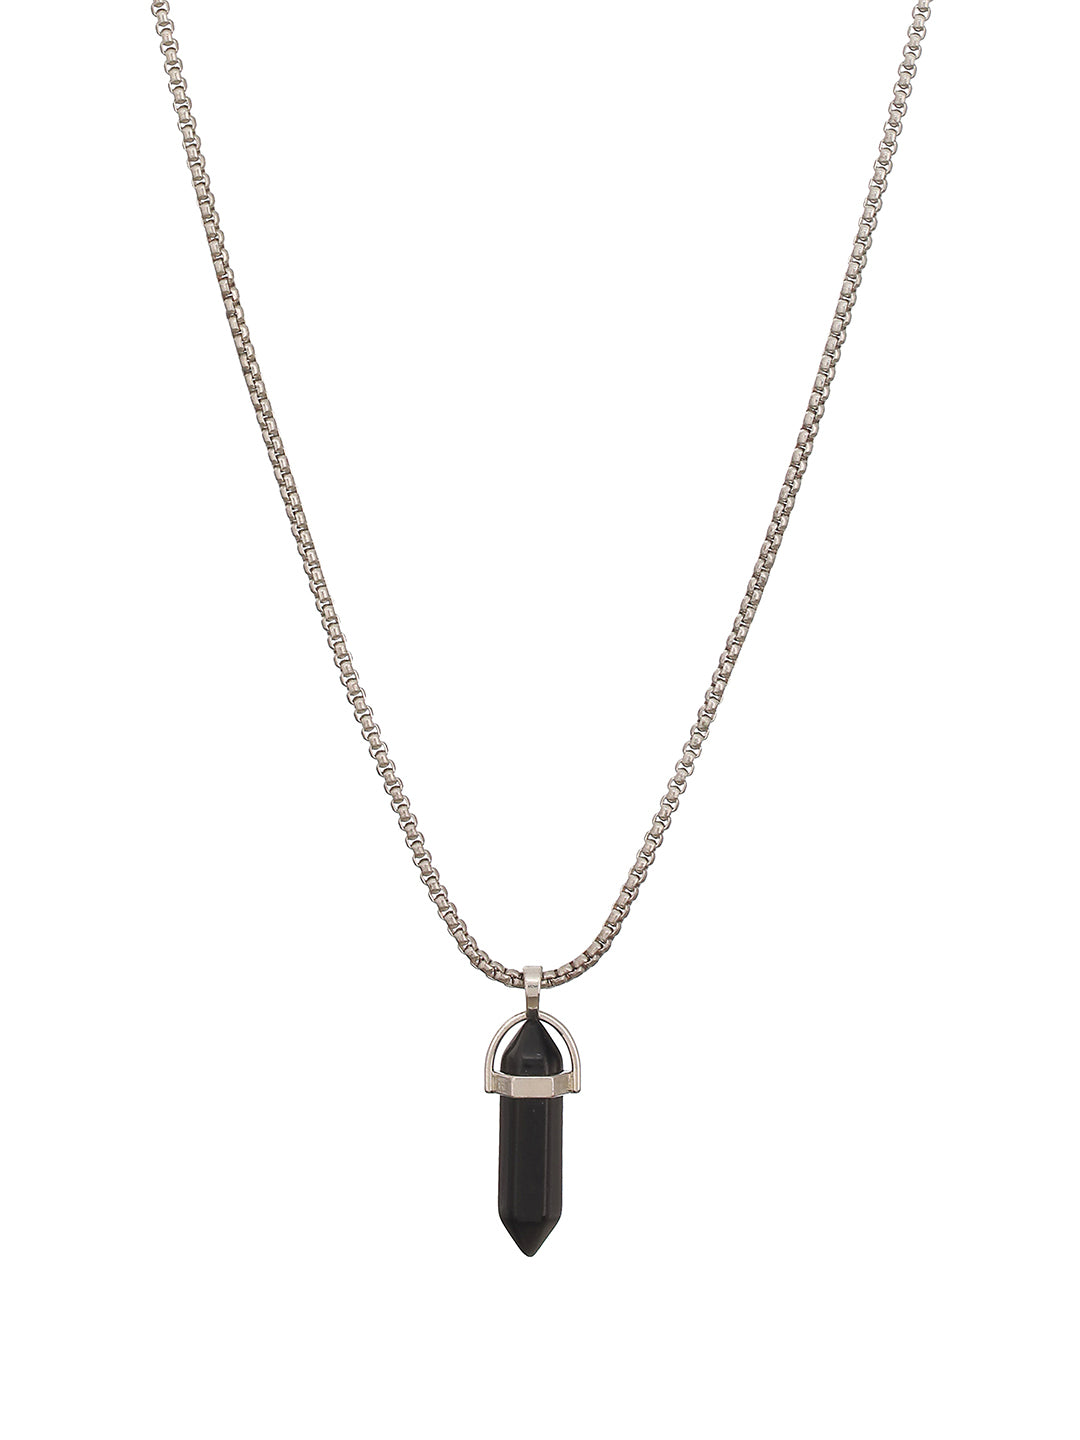 JAZZ AND SIZZLE Mens Silver-Toned & Black Silver-Plated Necklace - Jazzandsizzle